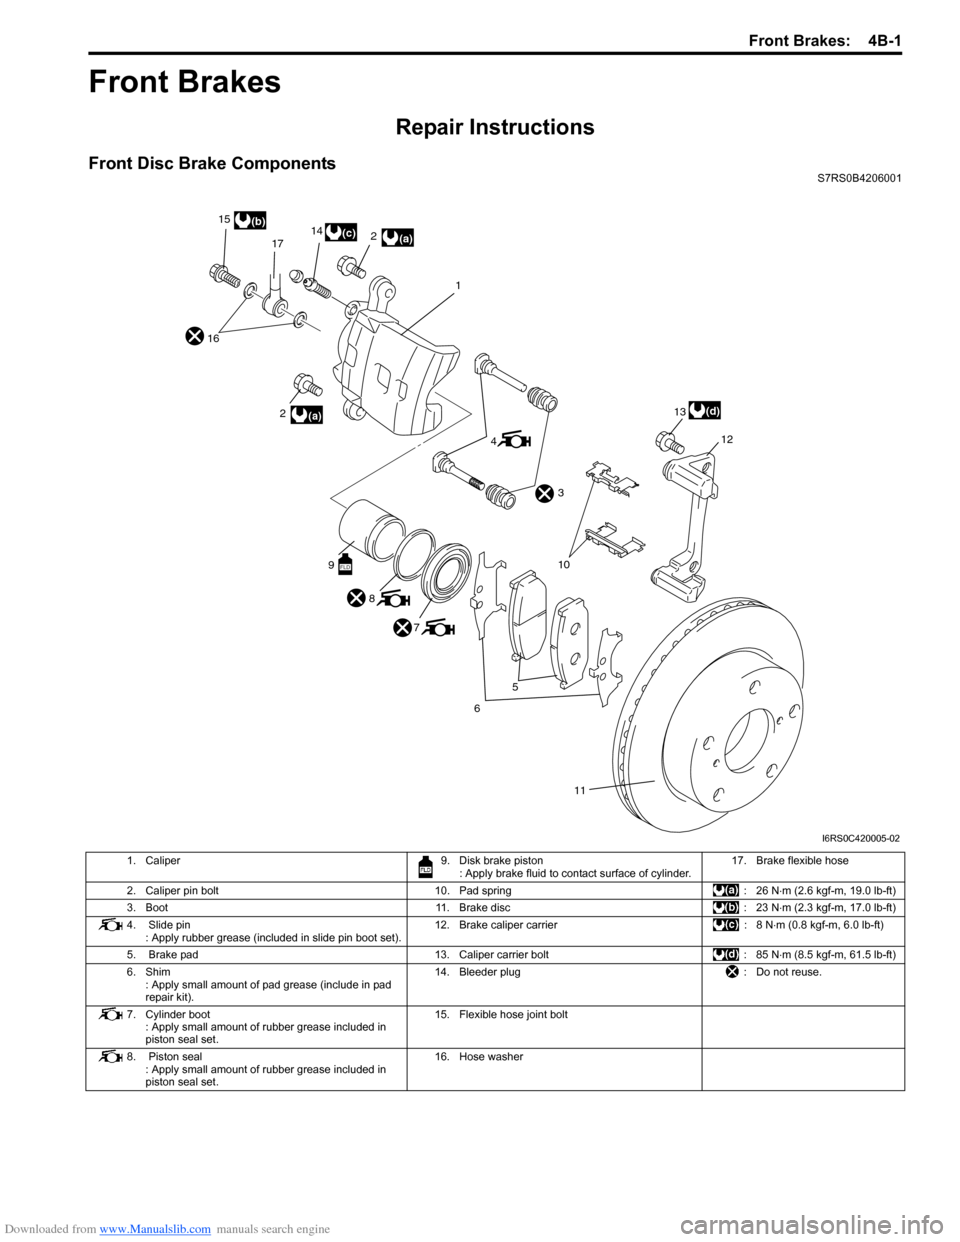 SUZUKI SWIFT 2004 2.G Service Workshop Manual Downloaded from www.Manualslib.com manuals search engine Front Brakes:  4B-1
Brakes
Front Brakes
Repair Instructions
Front Disc Brake ComponentsS7RS0B4206001
11
5
6
10
4
1
16
17
12
8
7
3
2(a)
15
(b)
1